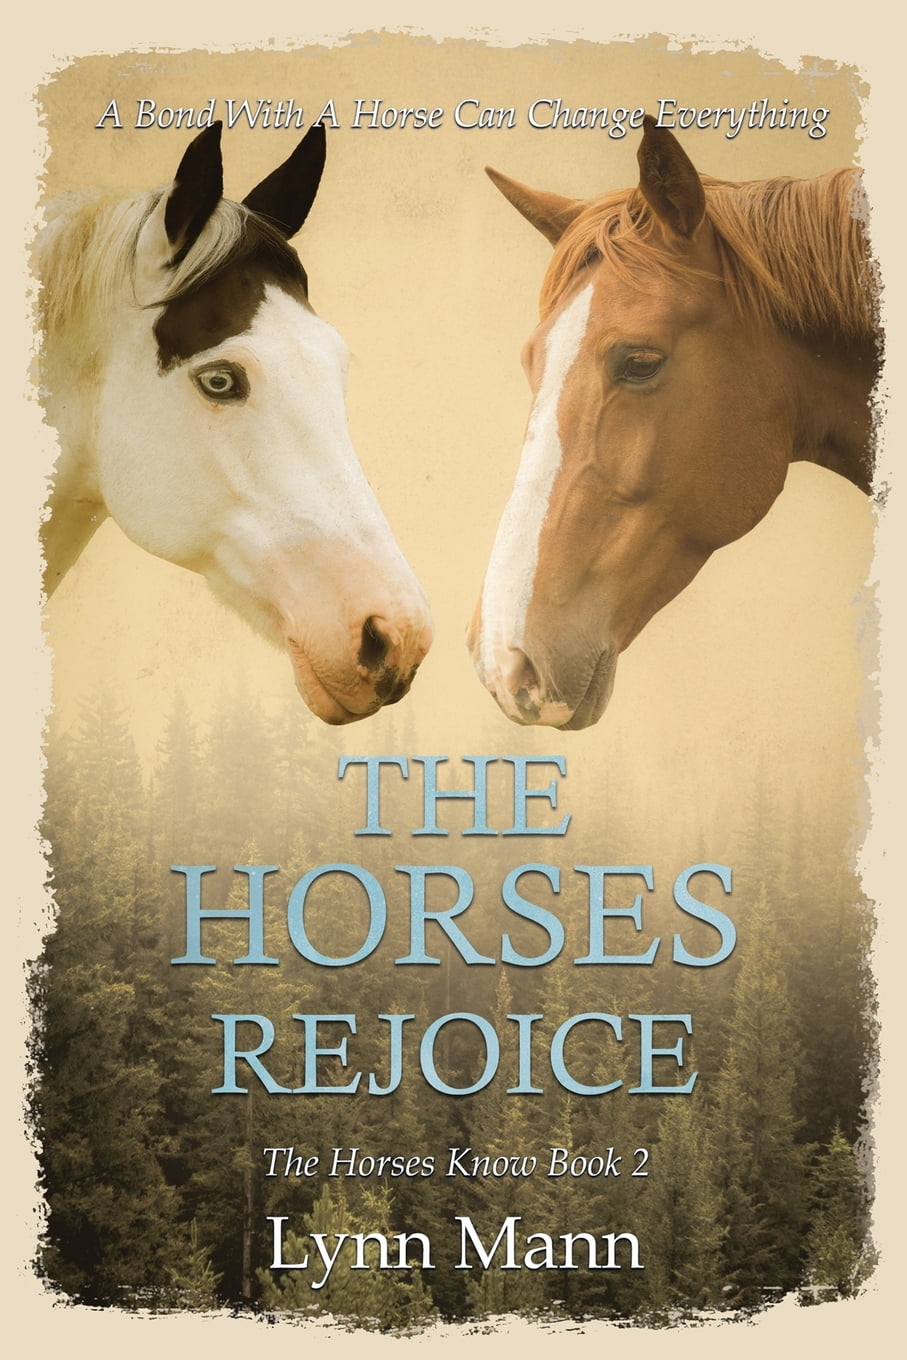 horse book review nytimes